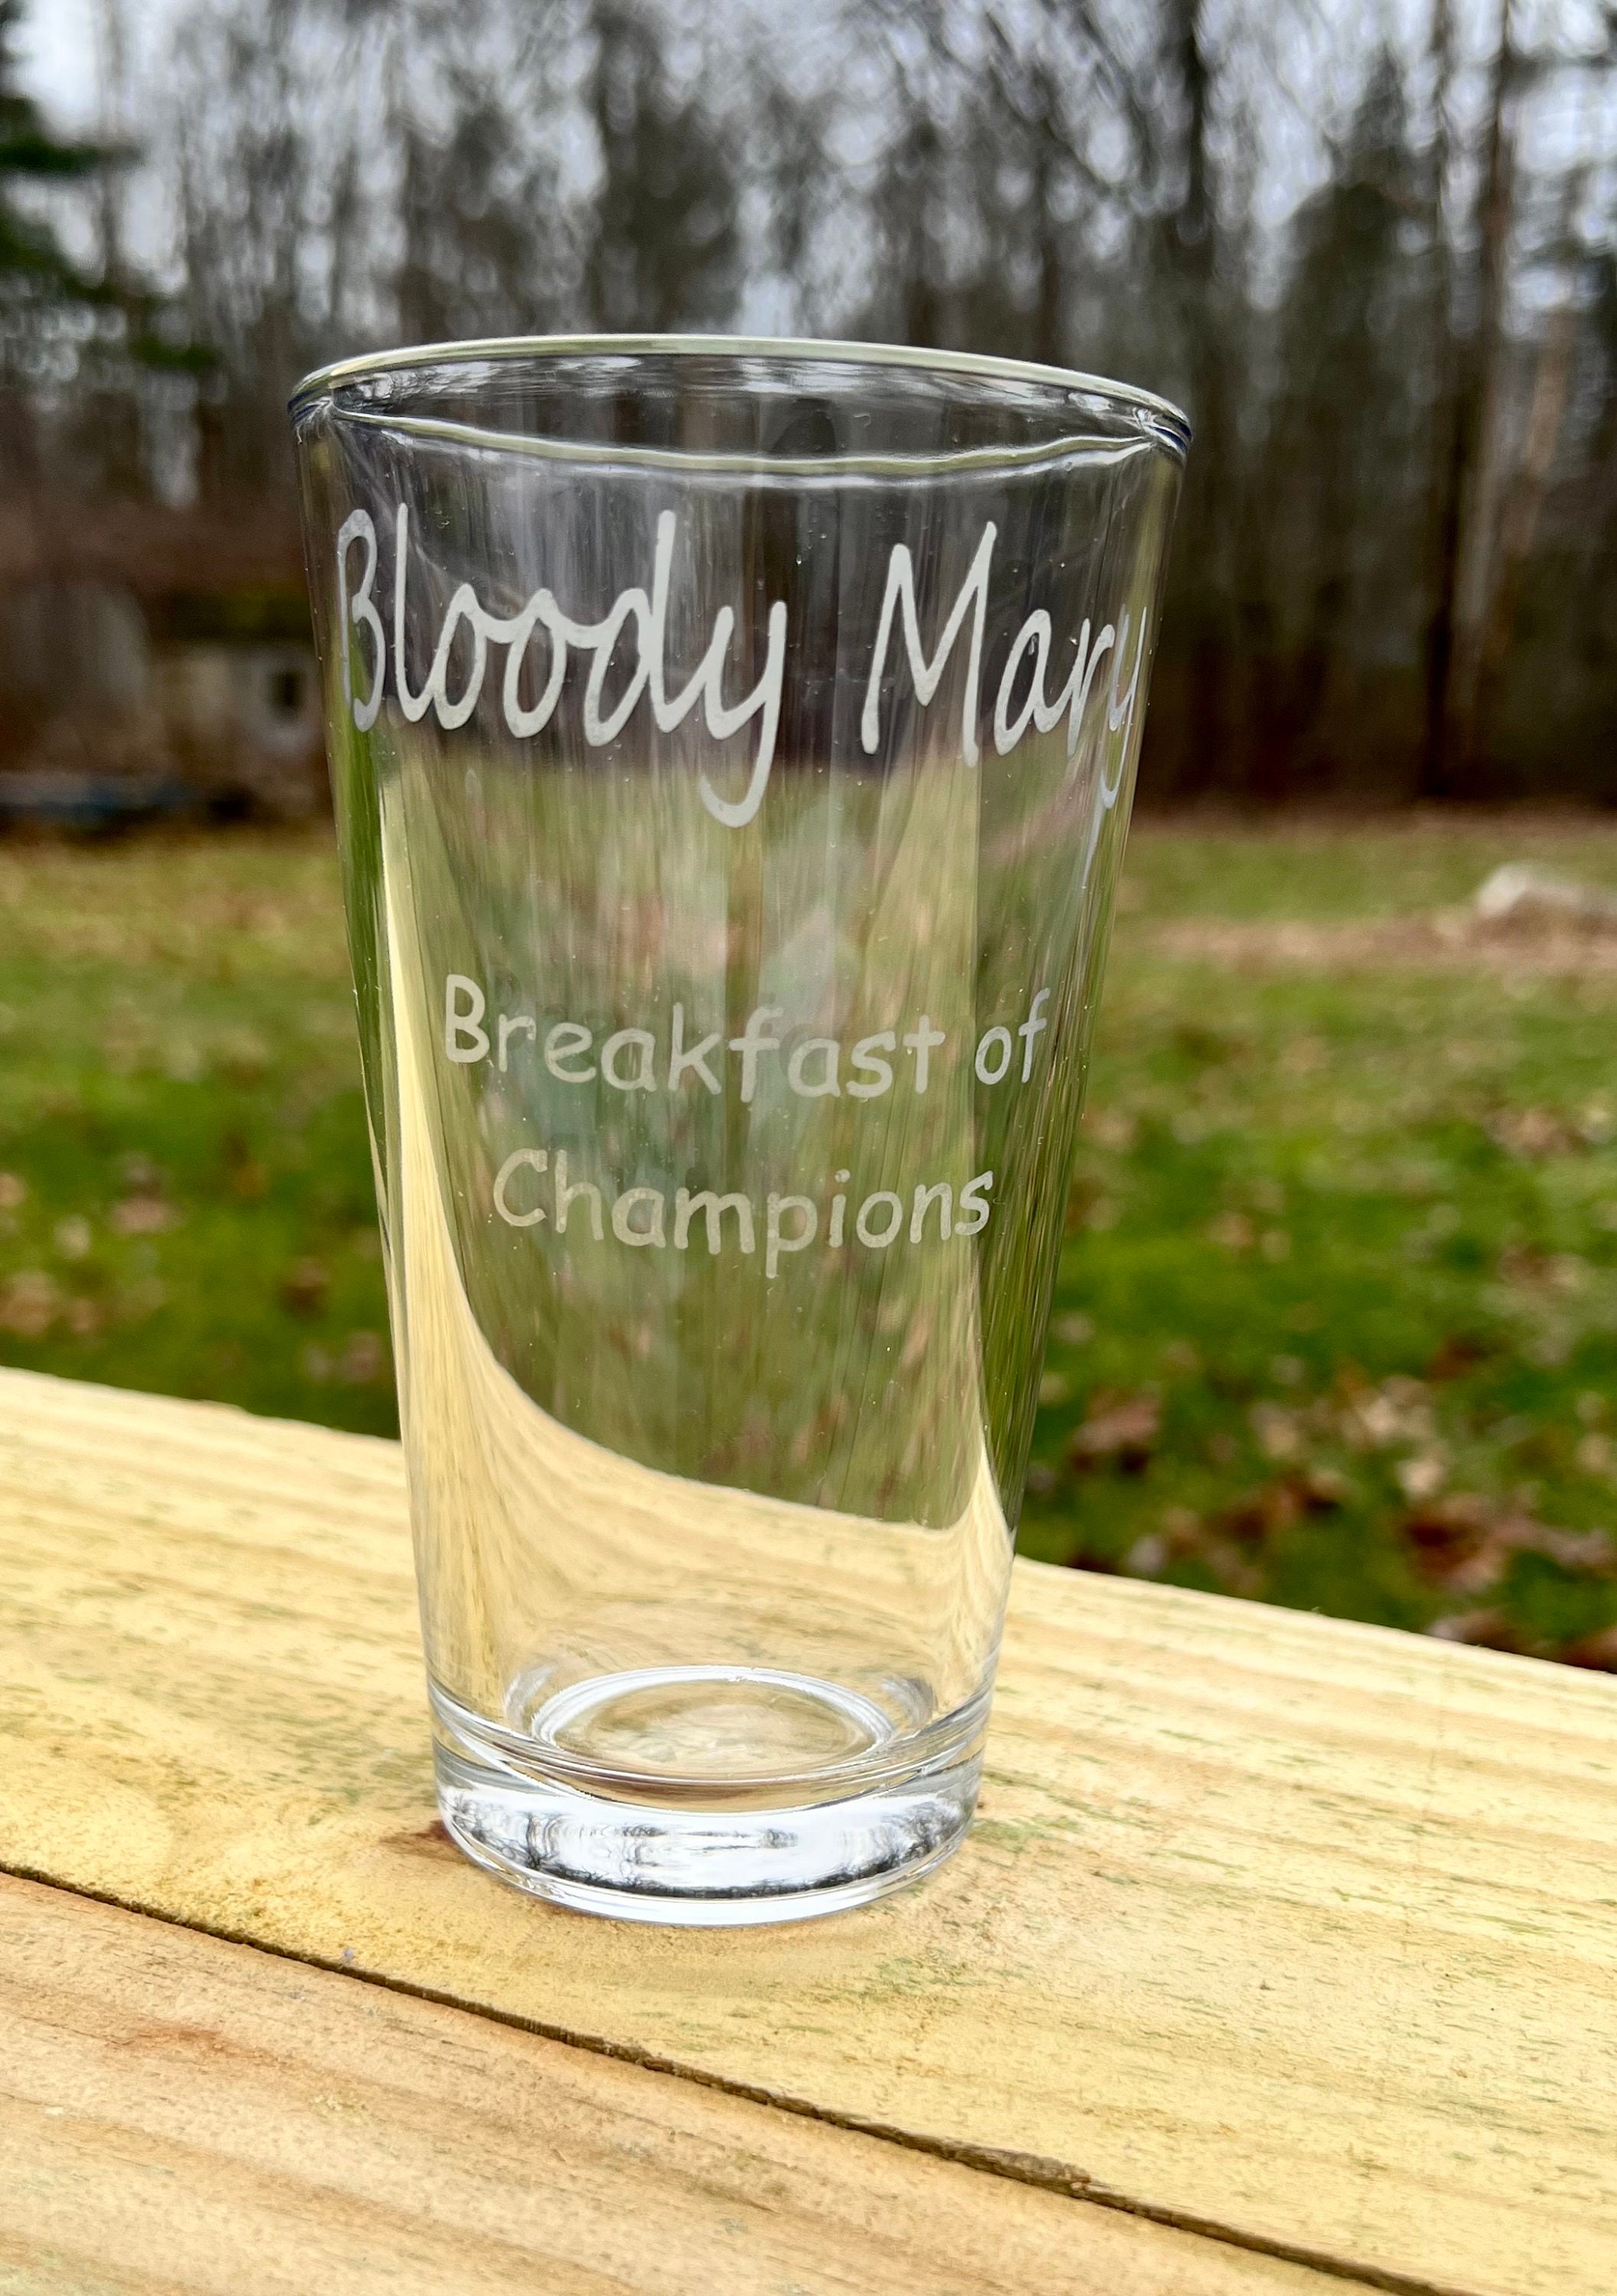 Bloody Mary Stadium Cups – PepperLou Gifts